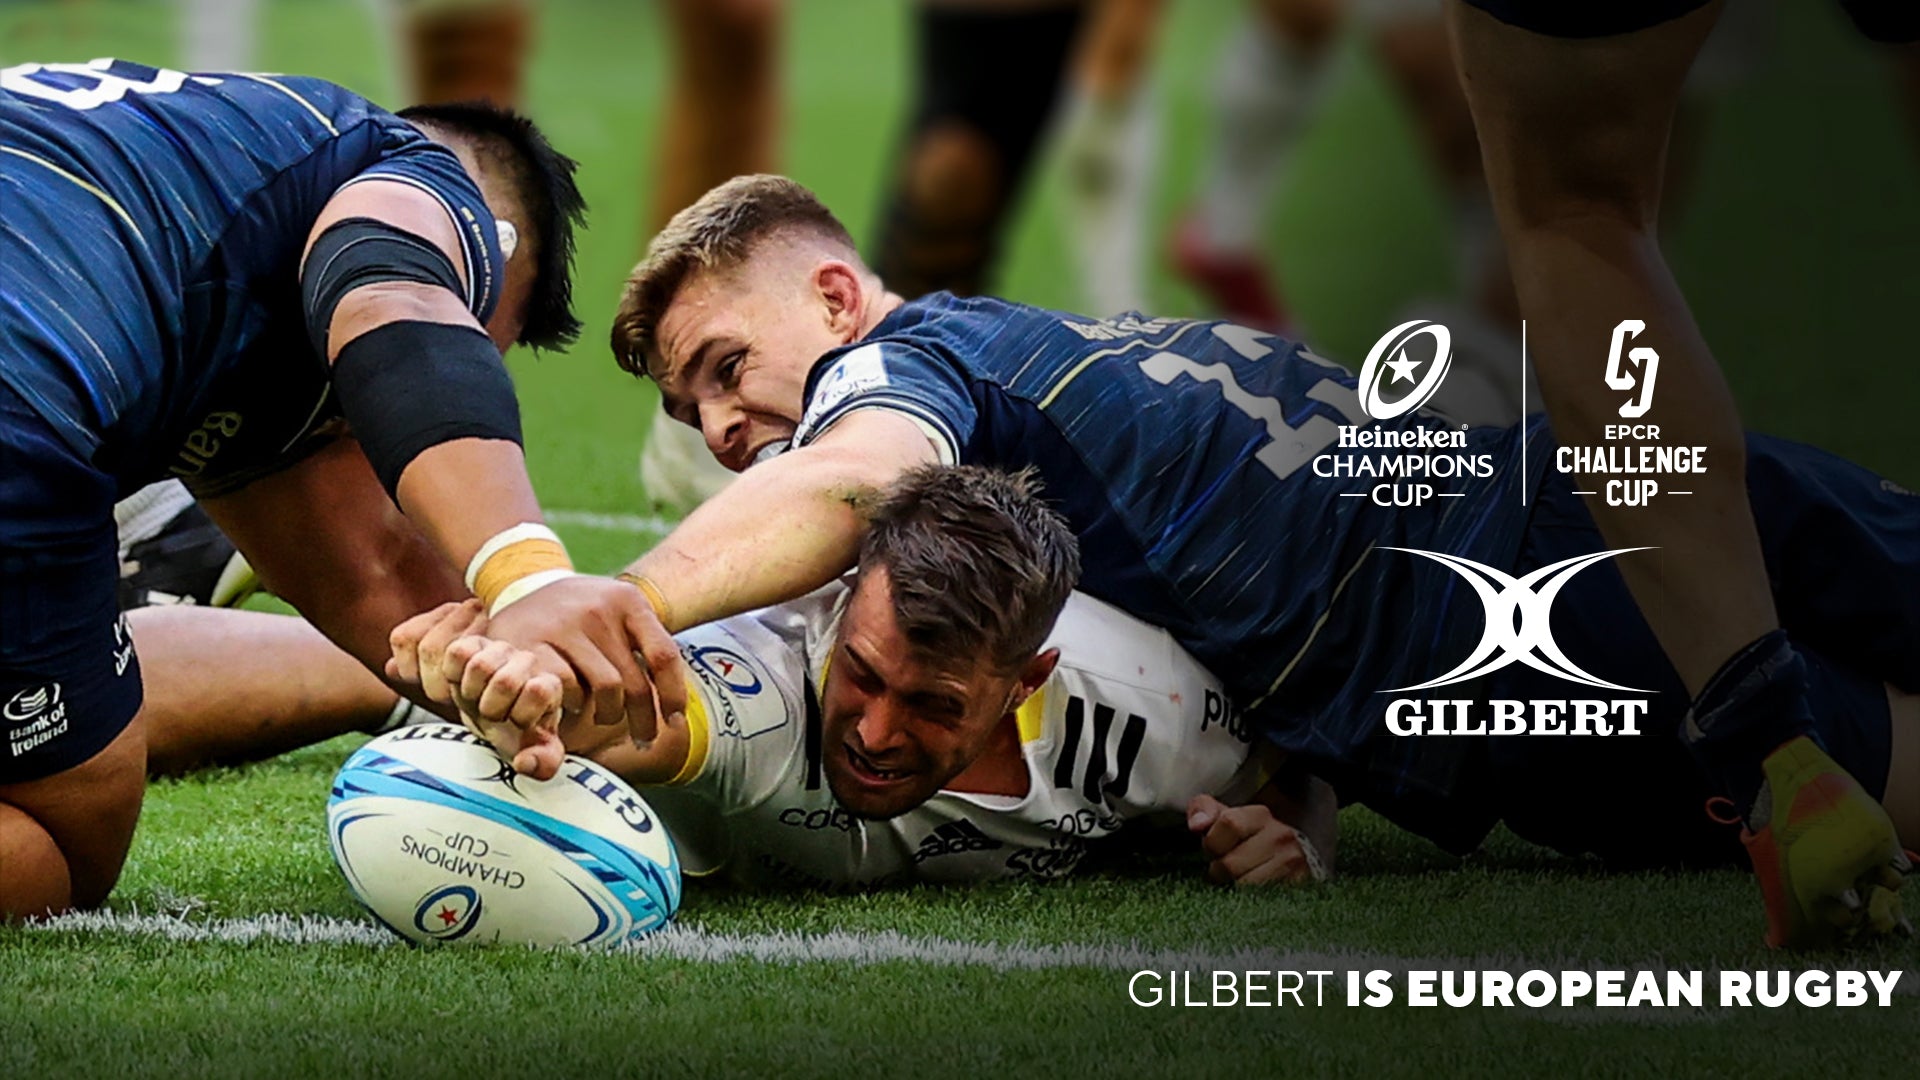 Gilbert to continue as Official Ball of European Rugby